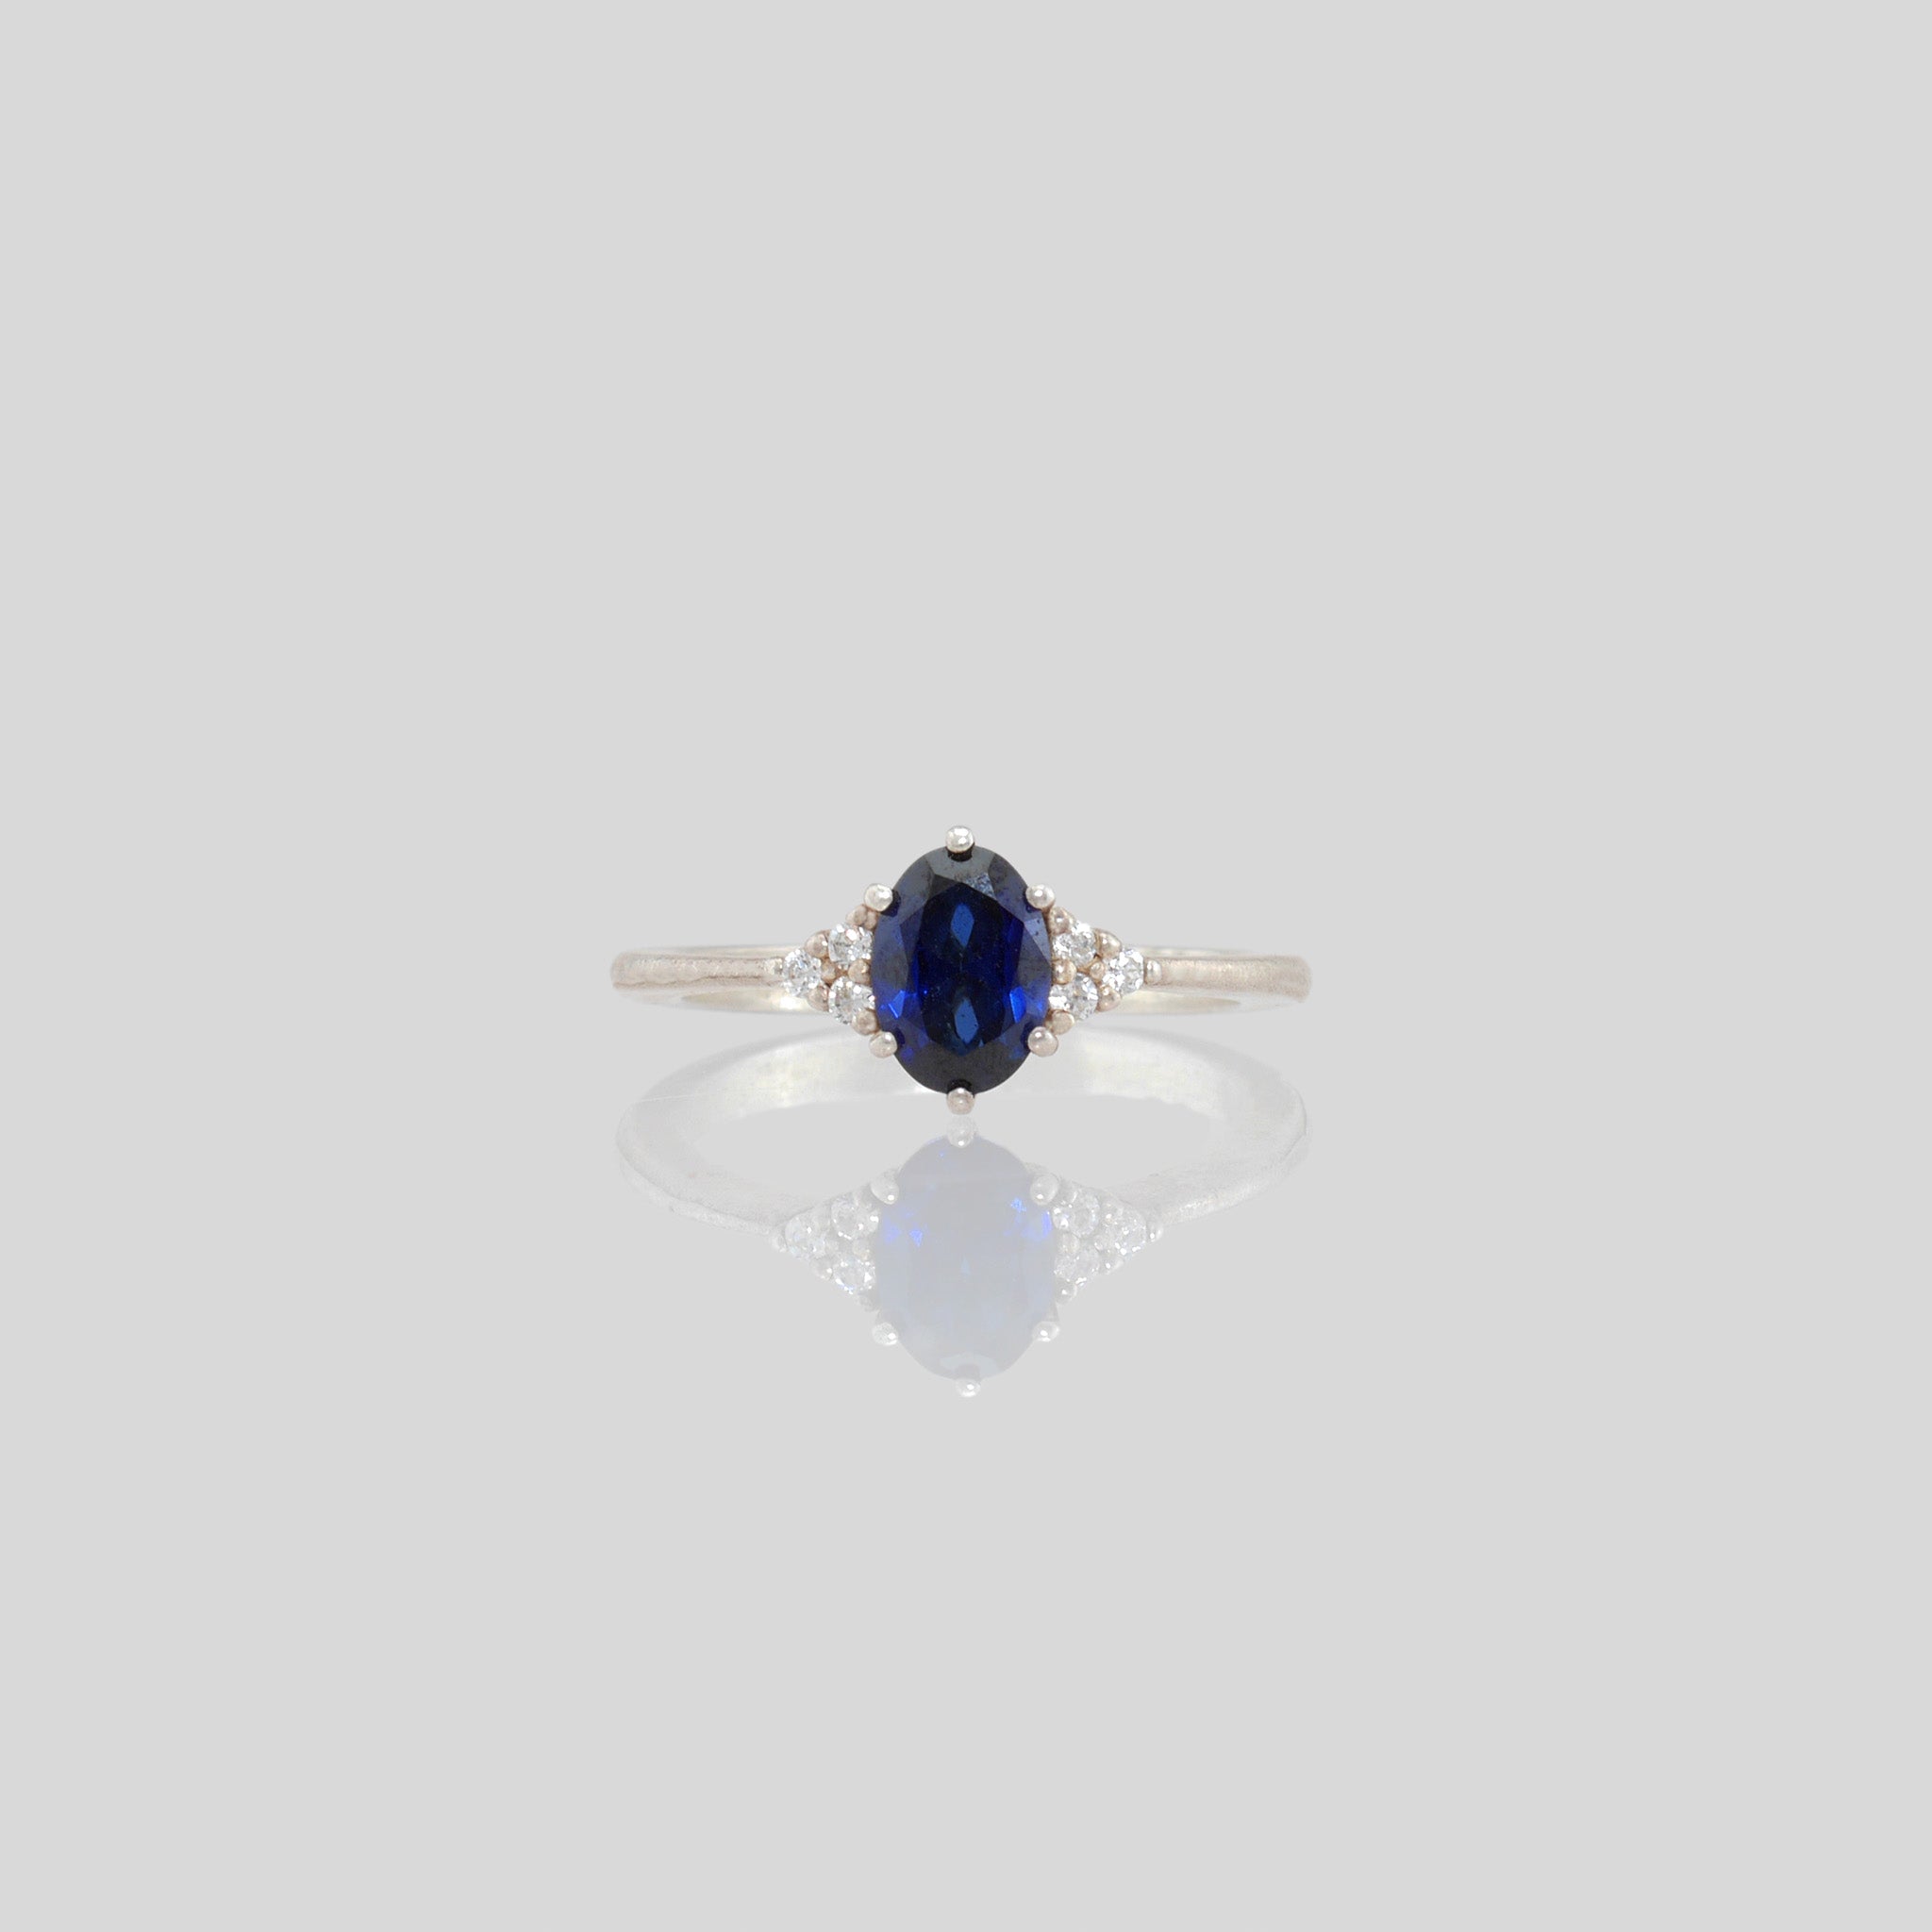 Front view of our White Gold engagement ring featuring an oval central Sapphire and three dainty Diamonds on each side, offering timeless elegance with added sparkle.